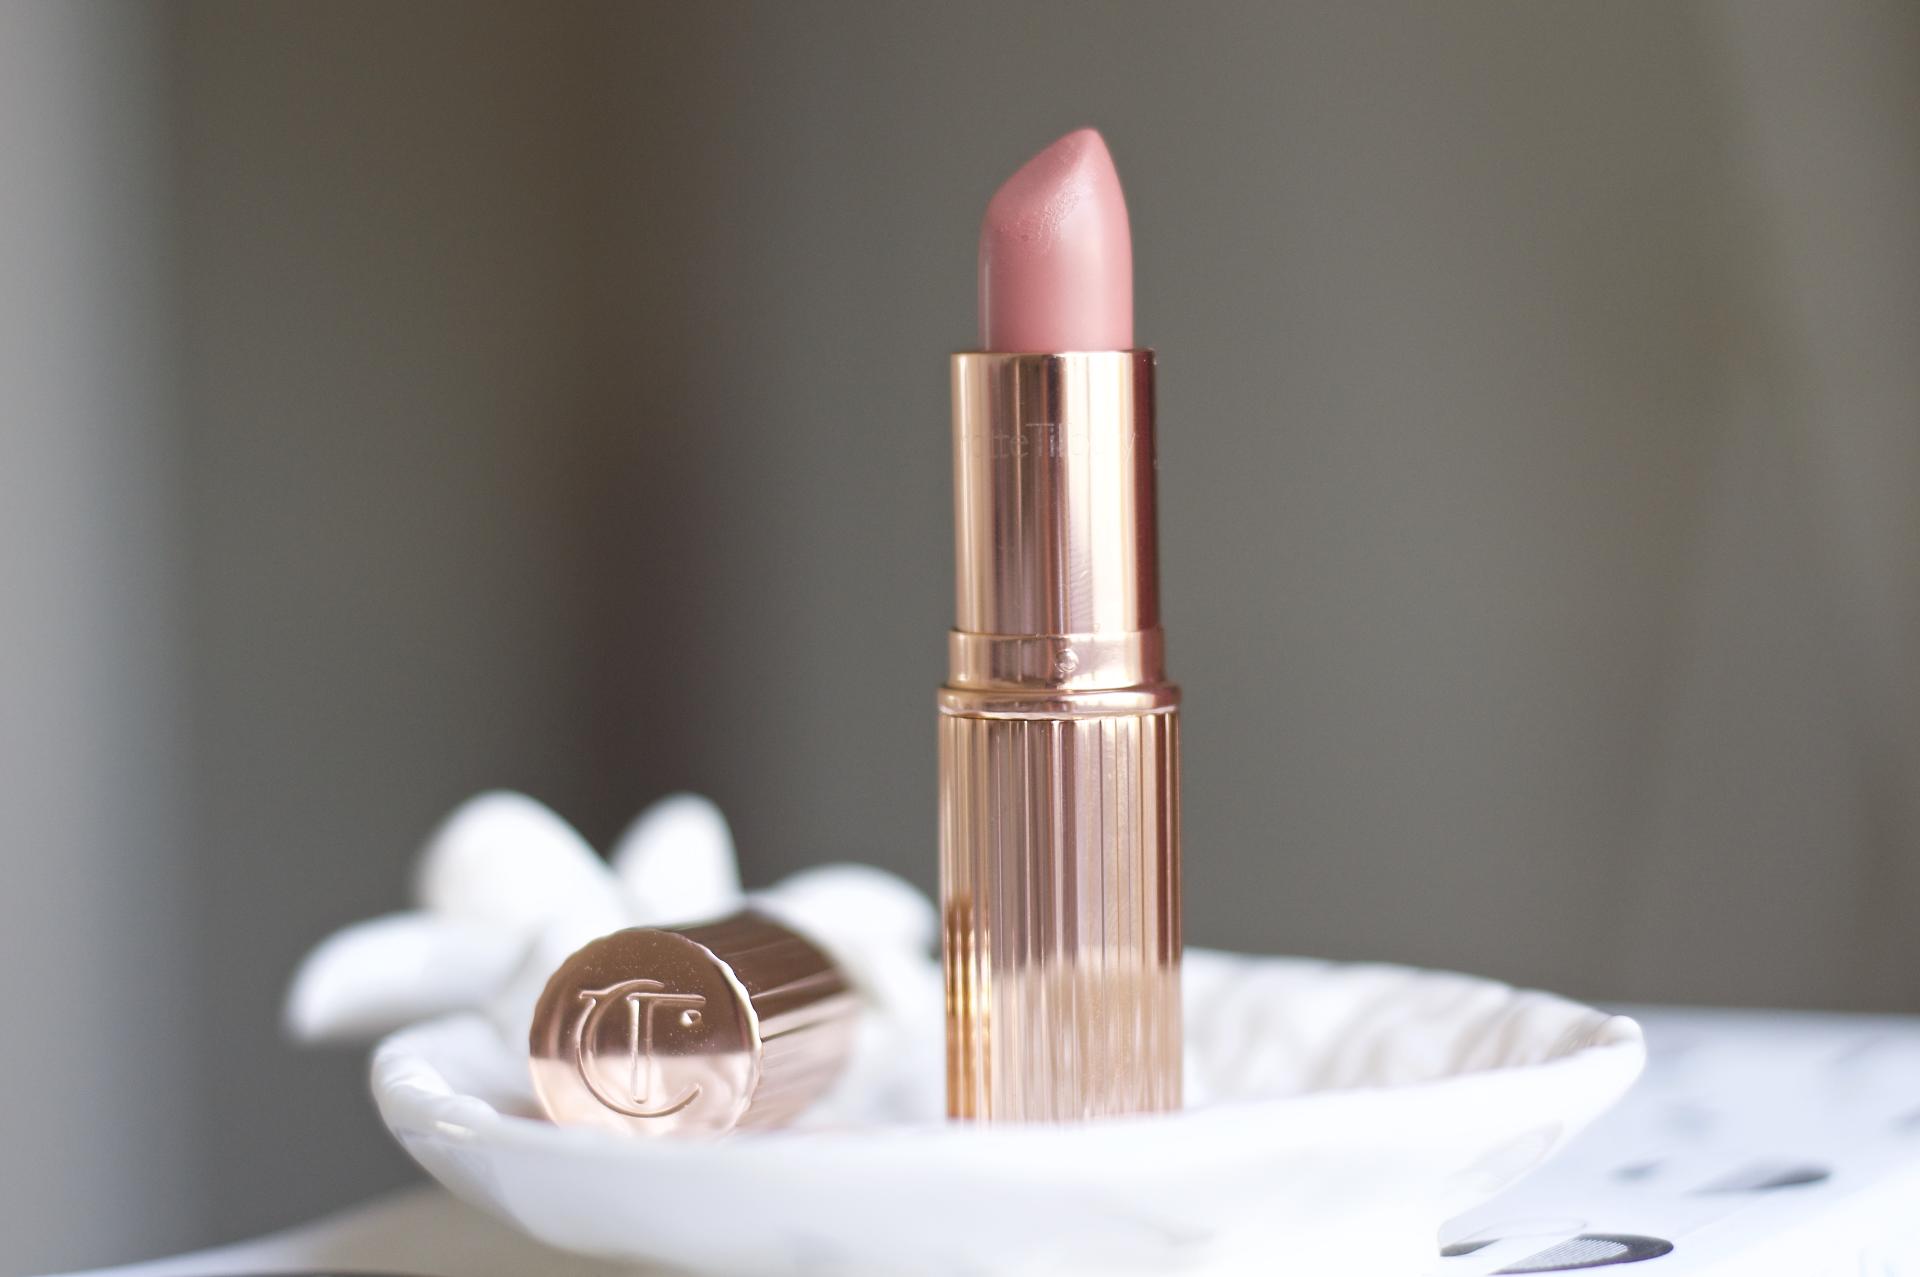 Made From Beauty Charlotte Tilbury K.I.S.S.I.N.G Lipstick in Bitch Perfect Review